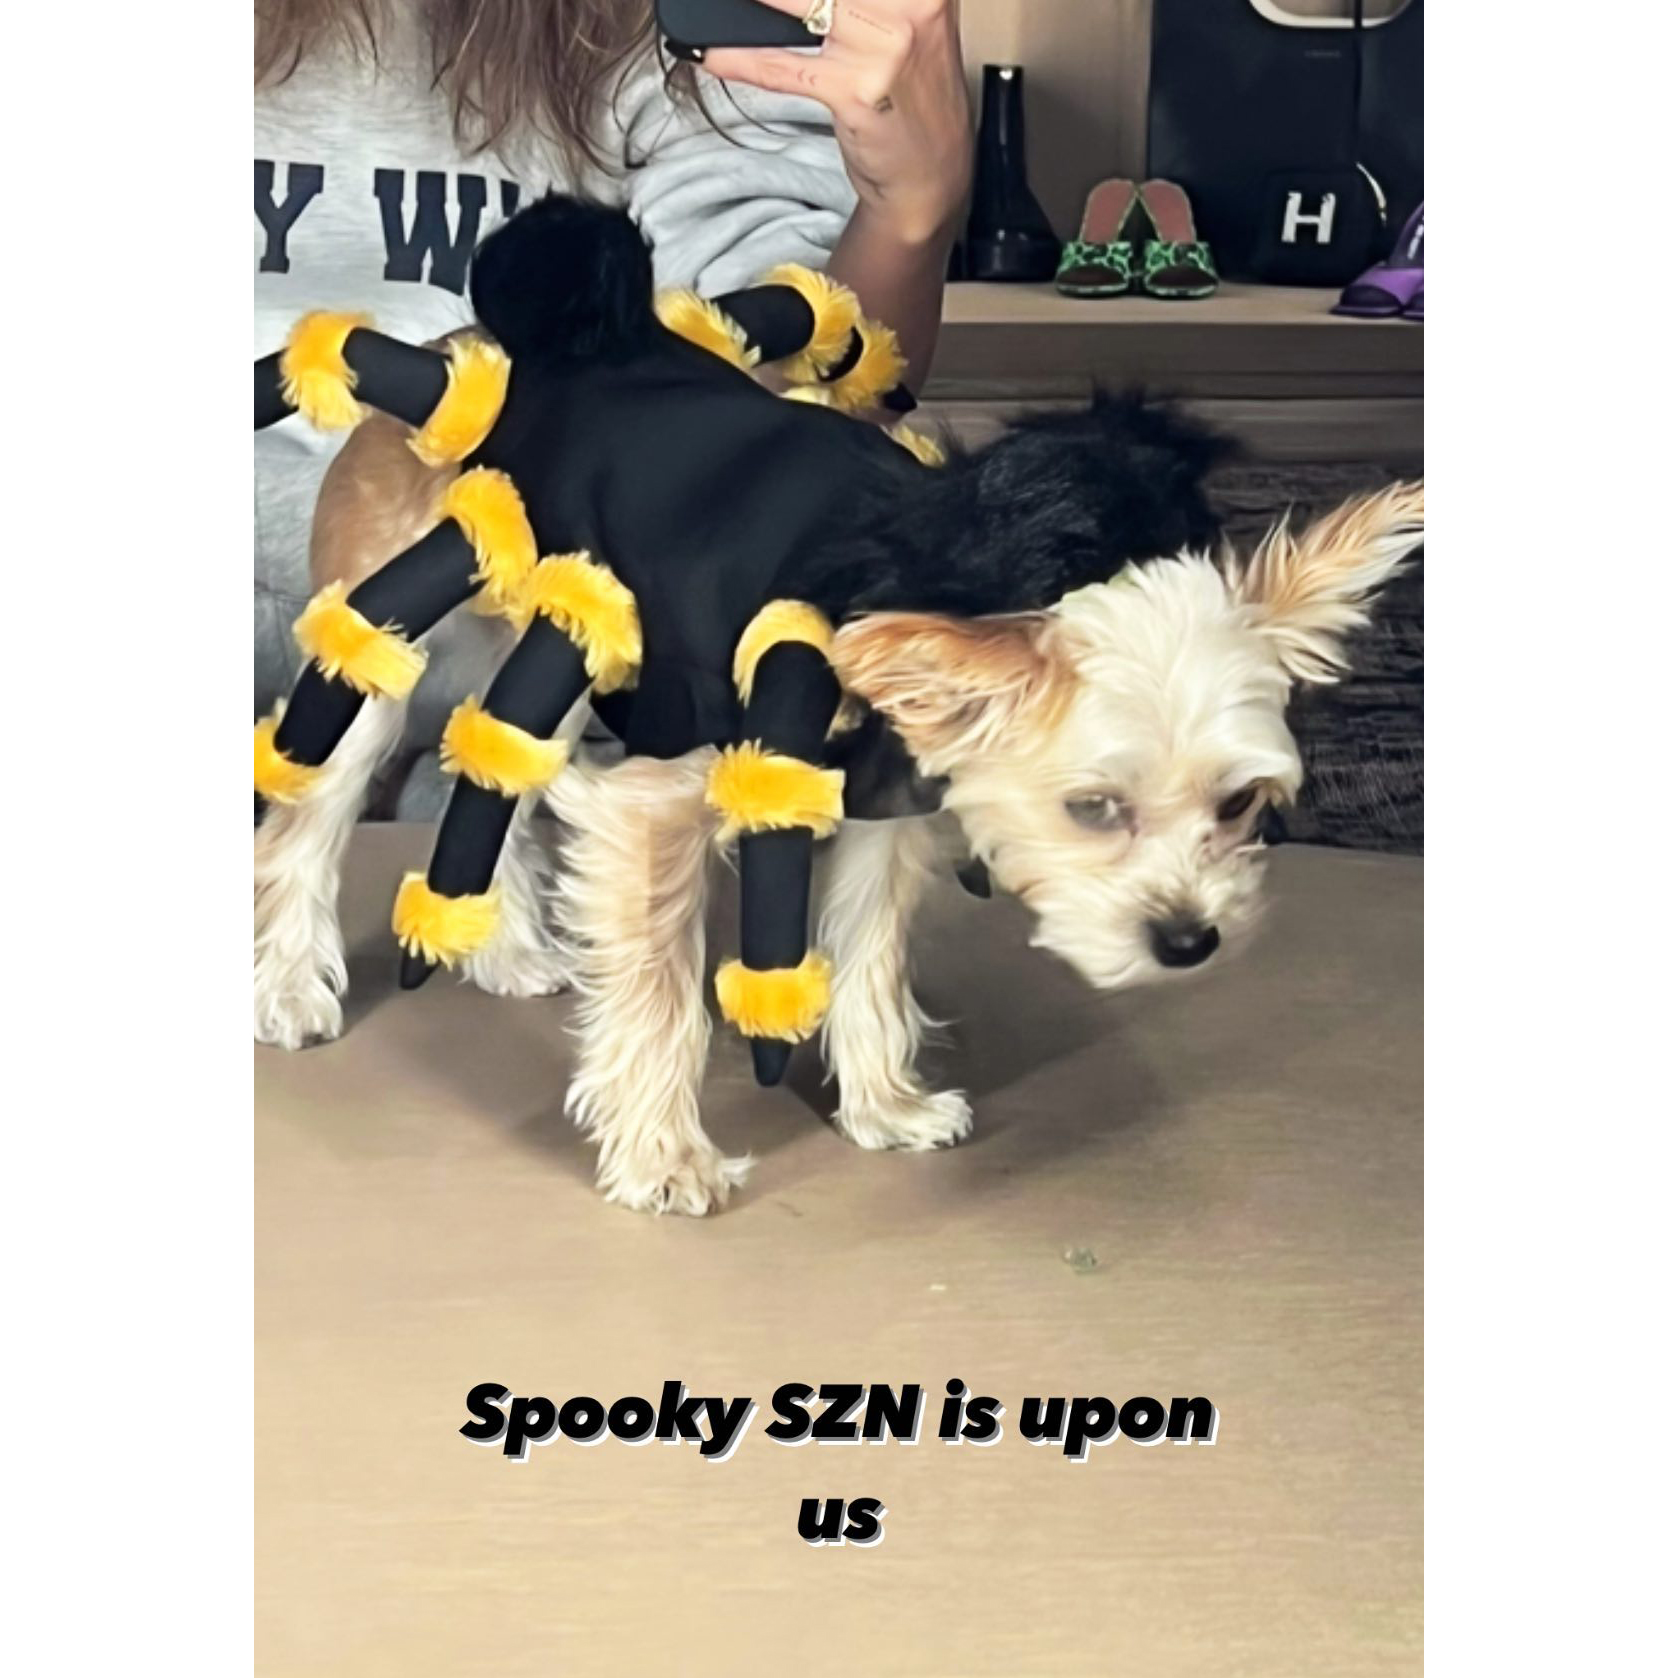 13 Best Celebrity Pet Halloween Costumes to Steal